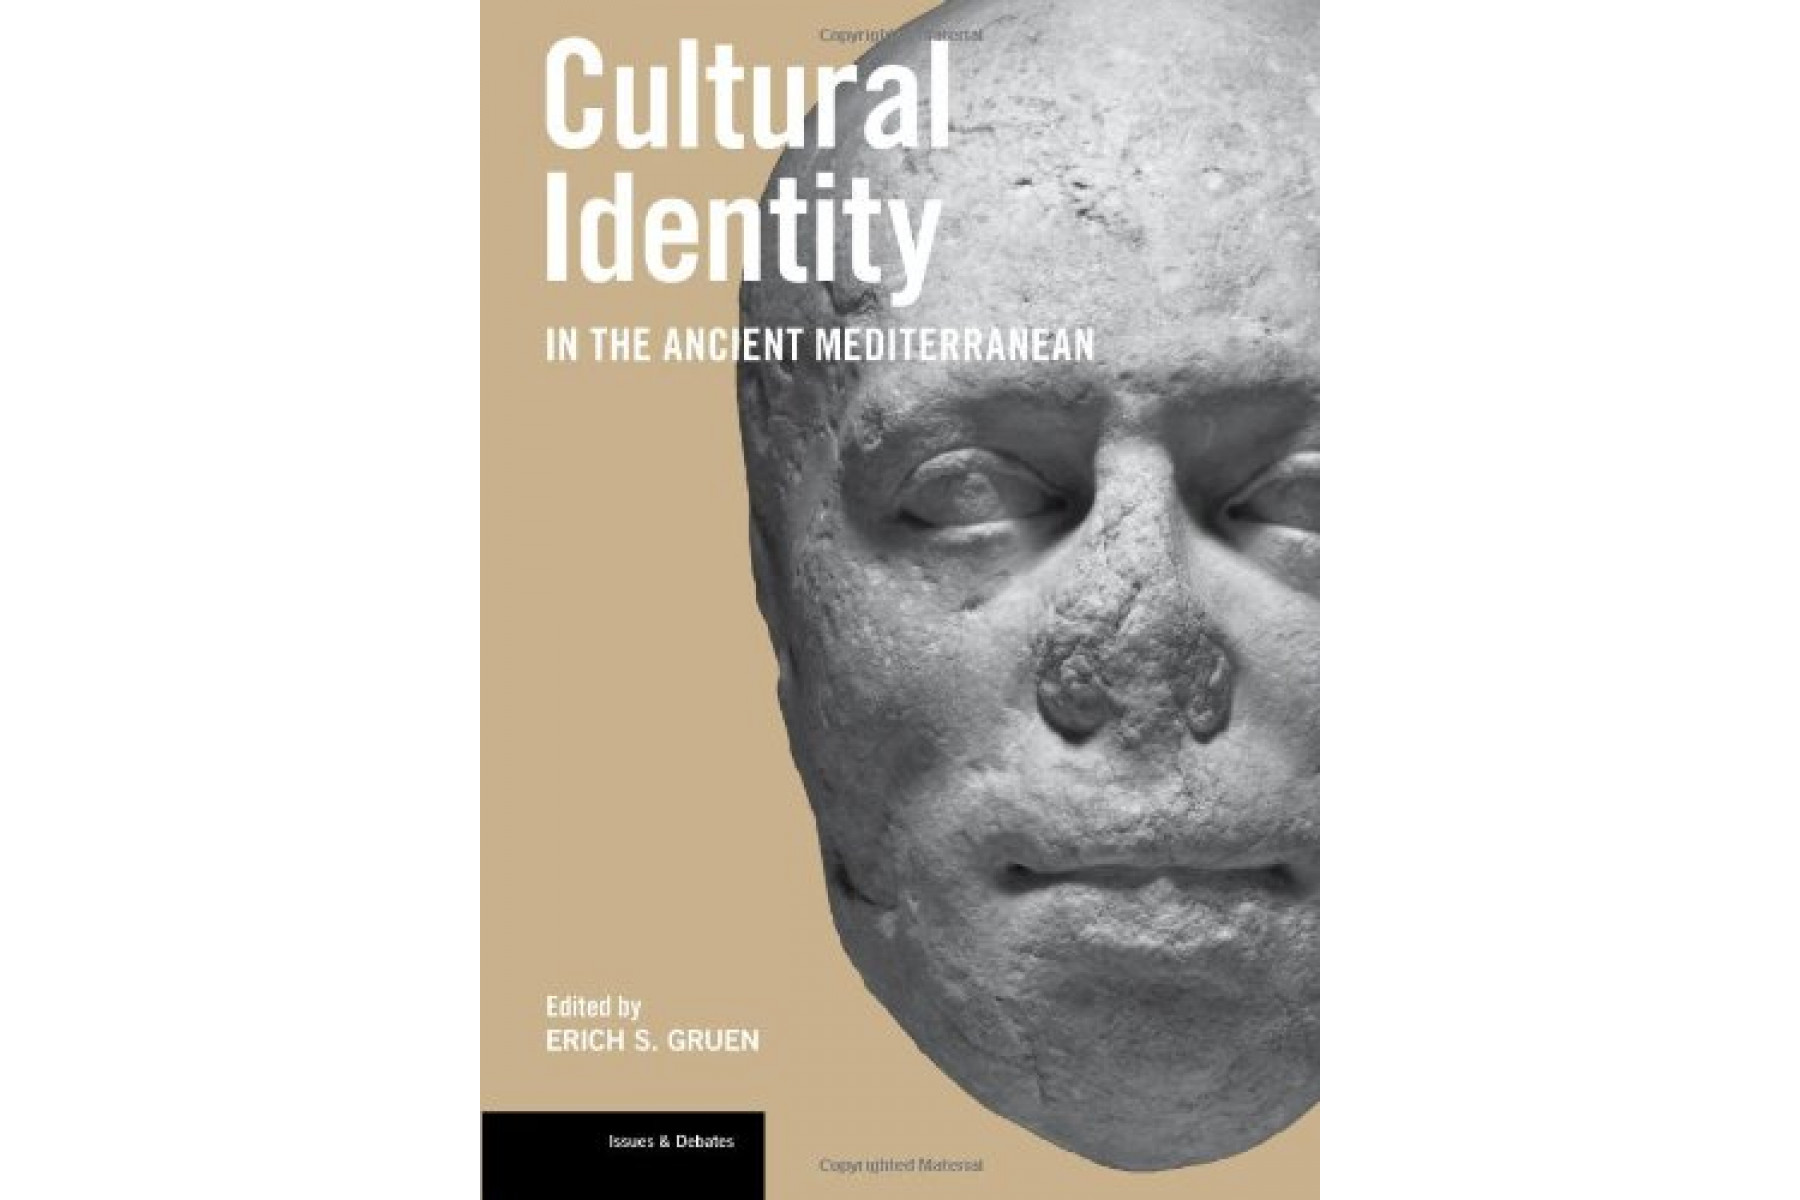 Cultural Identity in the Ancient Mediterranean (Issues & Debates)